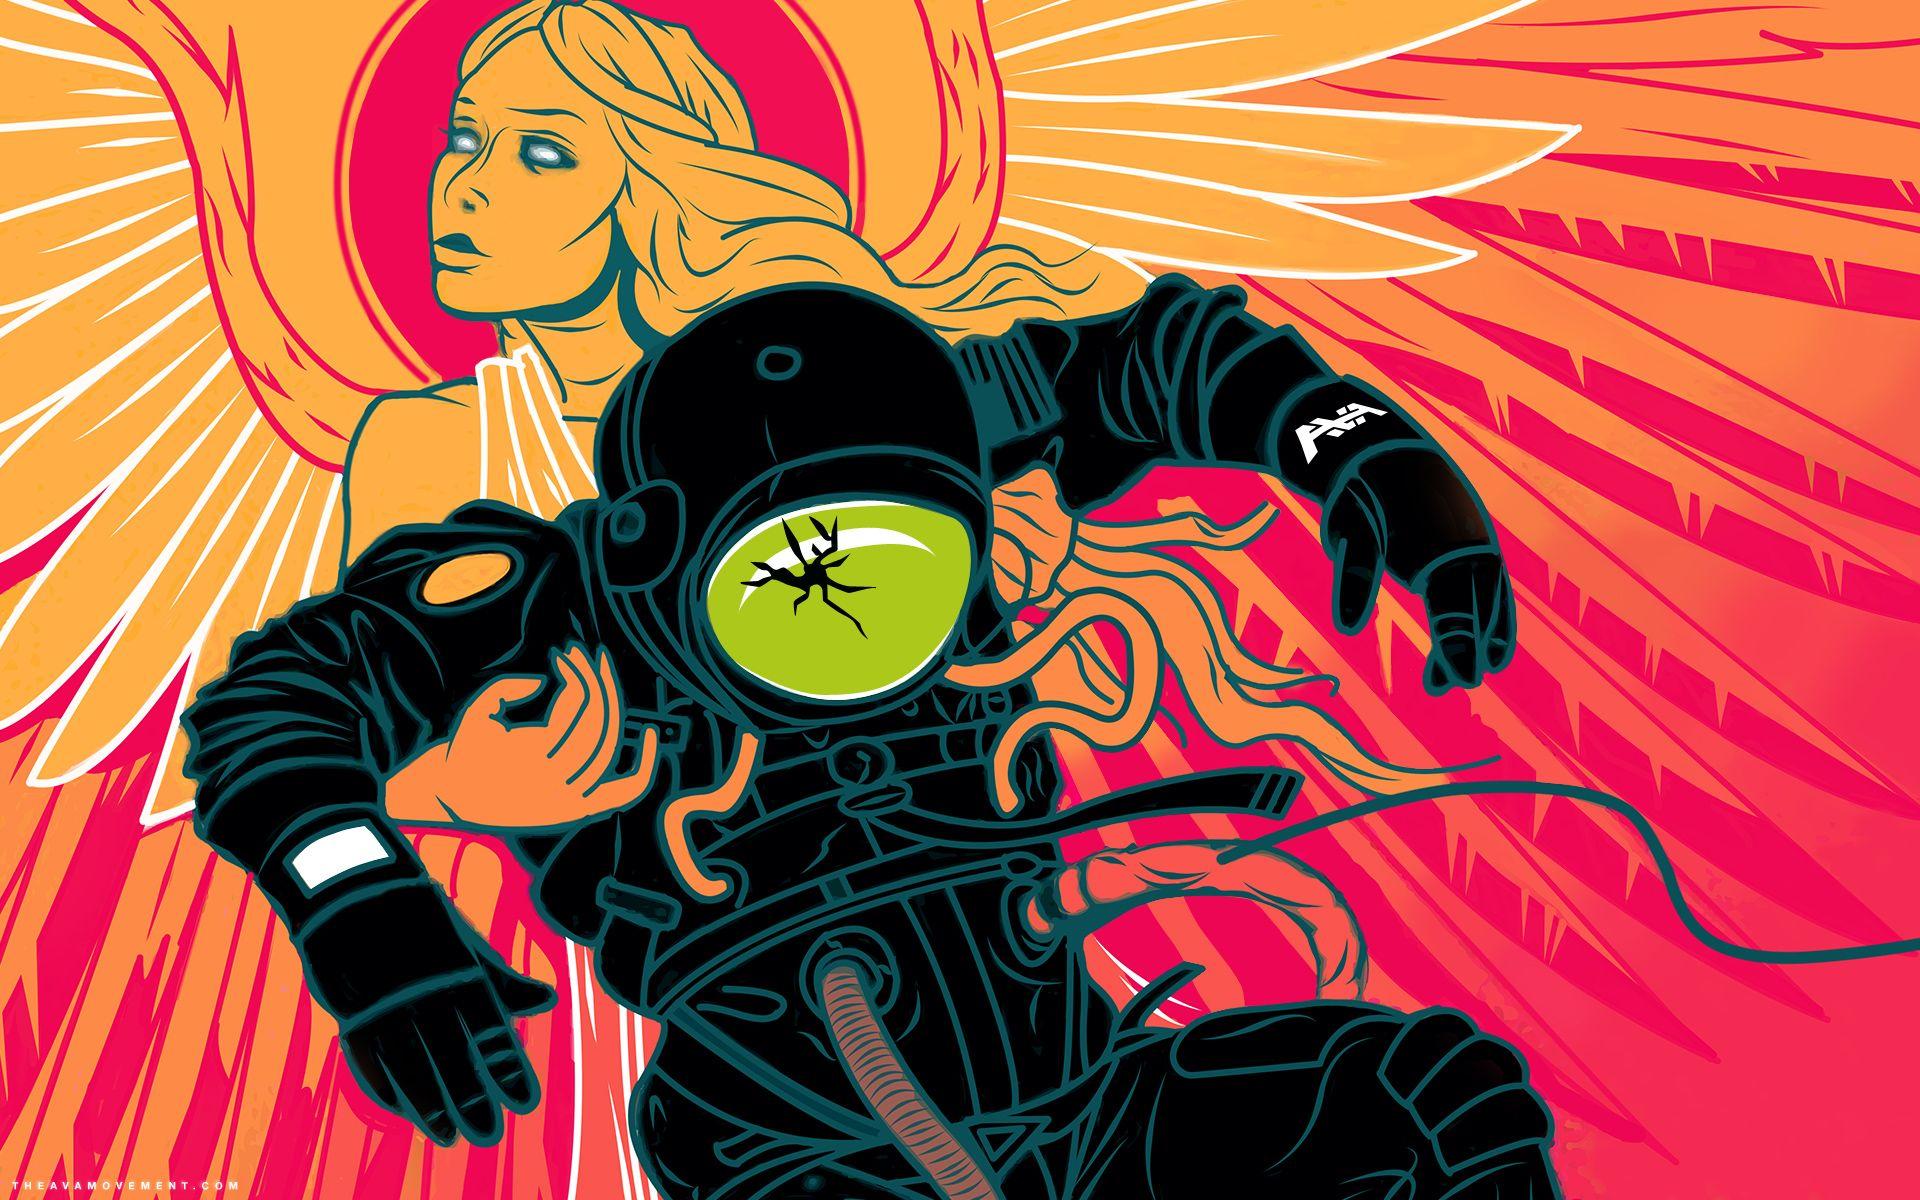 Angels And Airwaves Music Entertainment Posters Illustrations Sci Fi